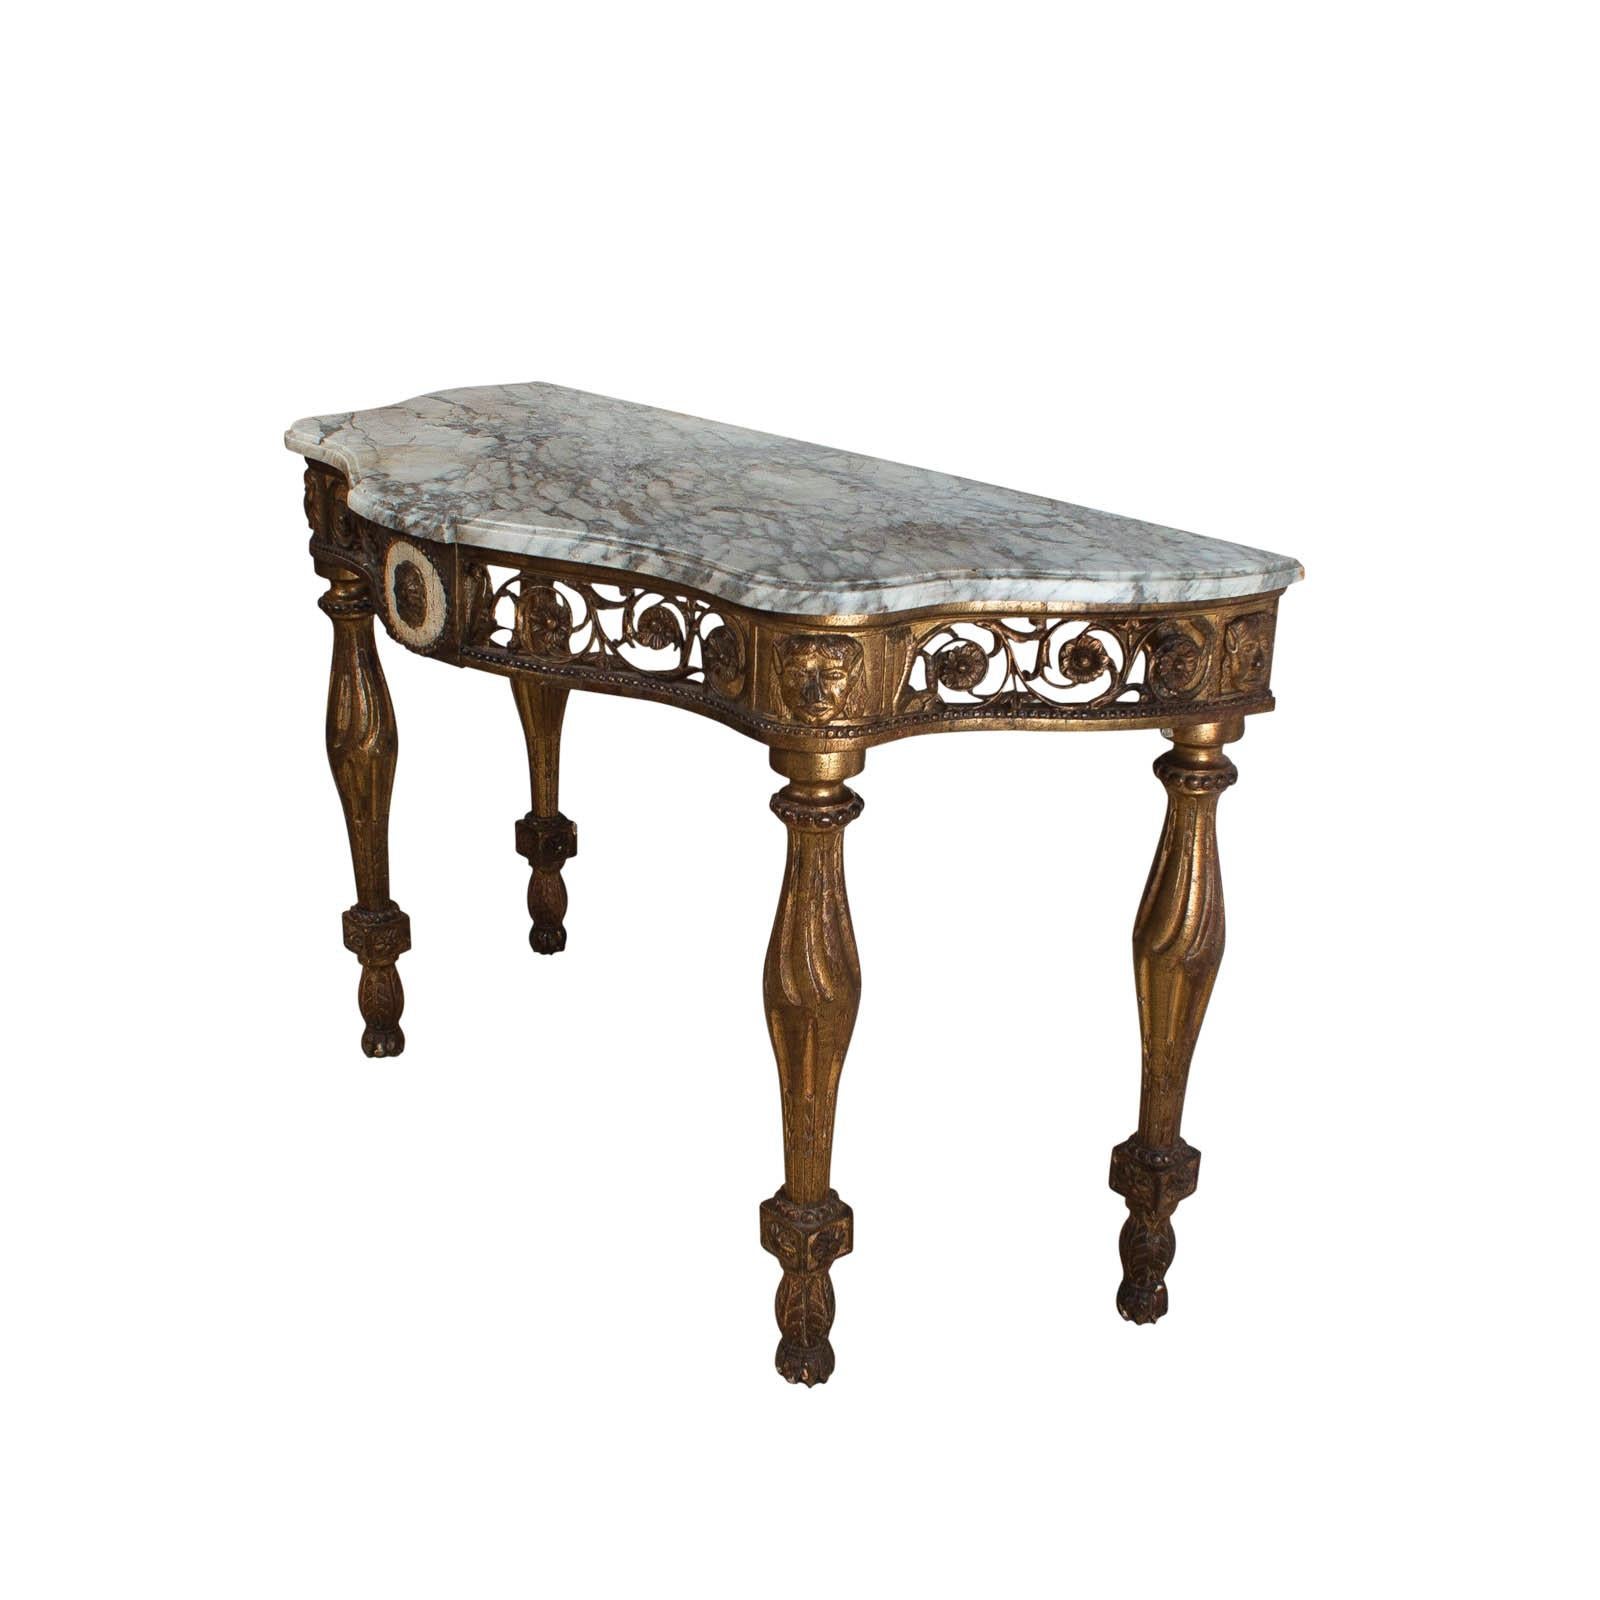 An early 19th century Italian neoclassical mecca gilt console with a later white and grey marble top, drilled for two lamp cords. Scrolling pierced rosettes flank a central medallion featuring a mecca gilt rosette on a white painted panel surrounded